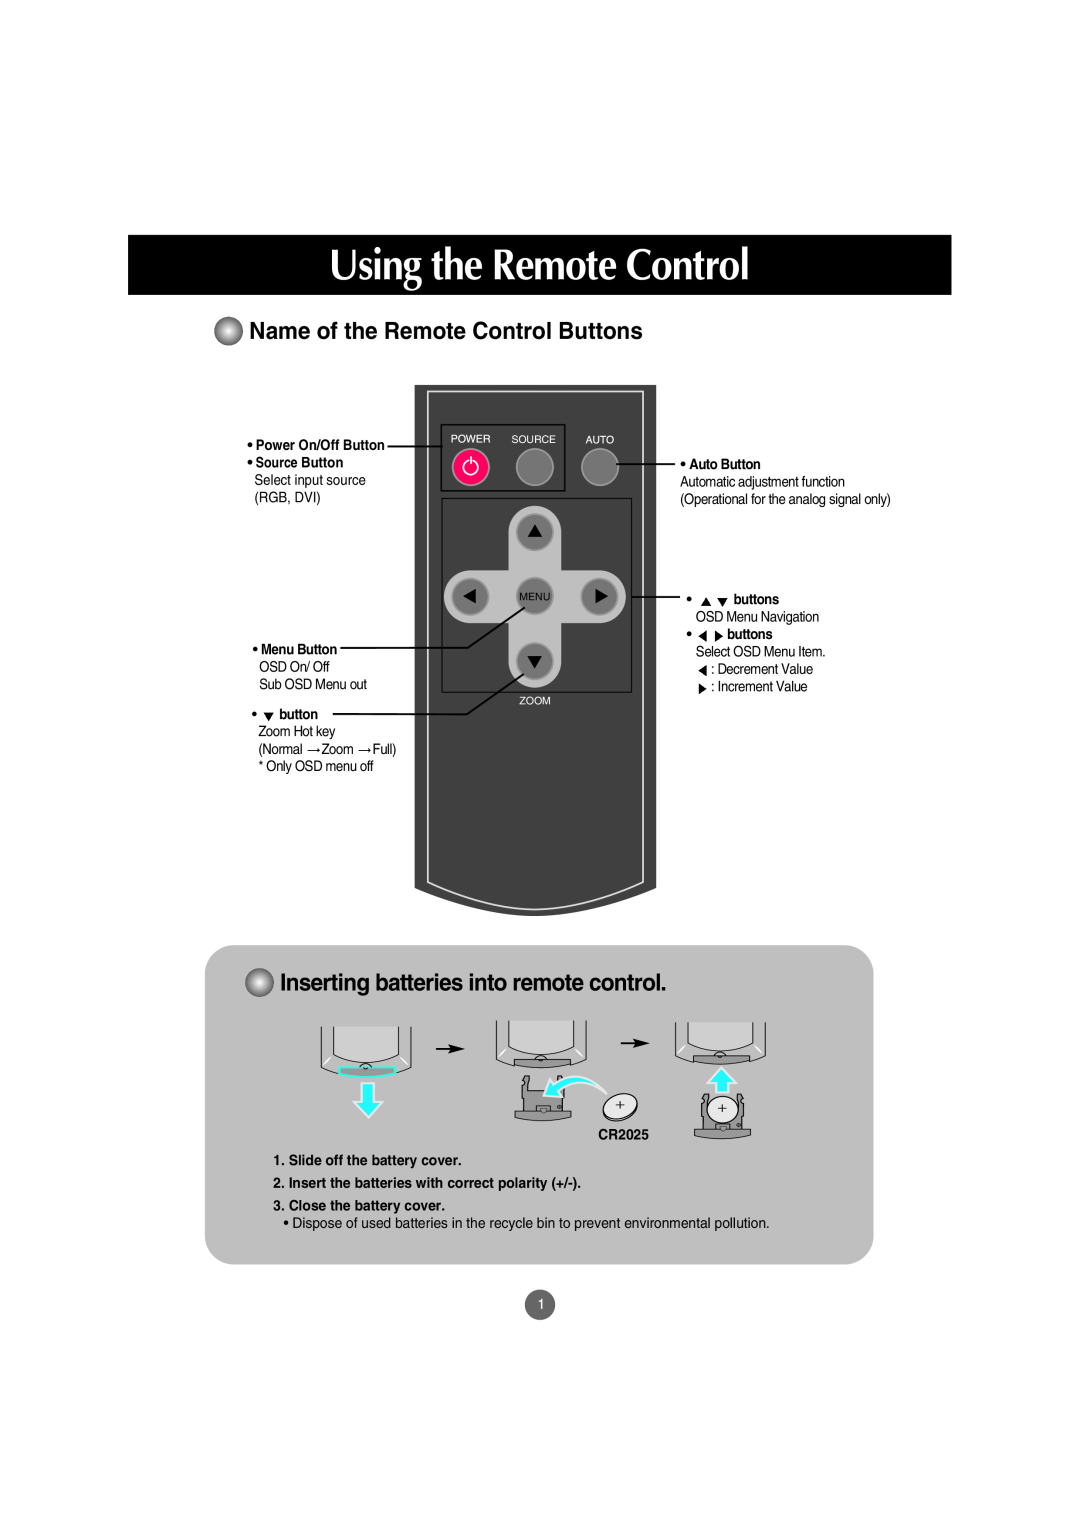 LG Electronics M2900S manual Using the Remote Control, Name of the Remote Control Buttons, Power On/Off Button, buttons 